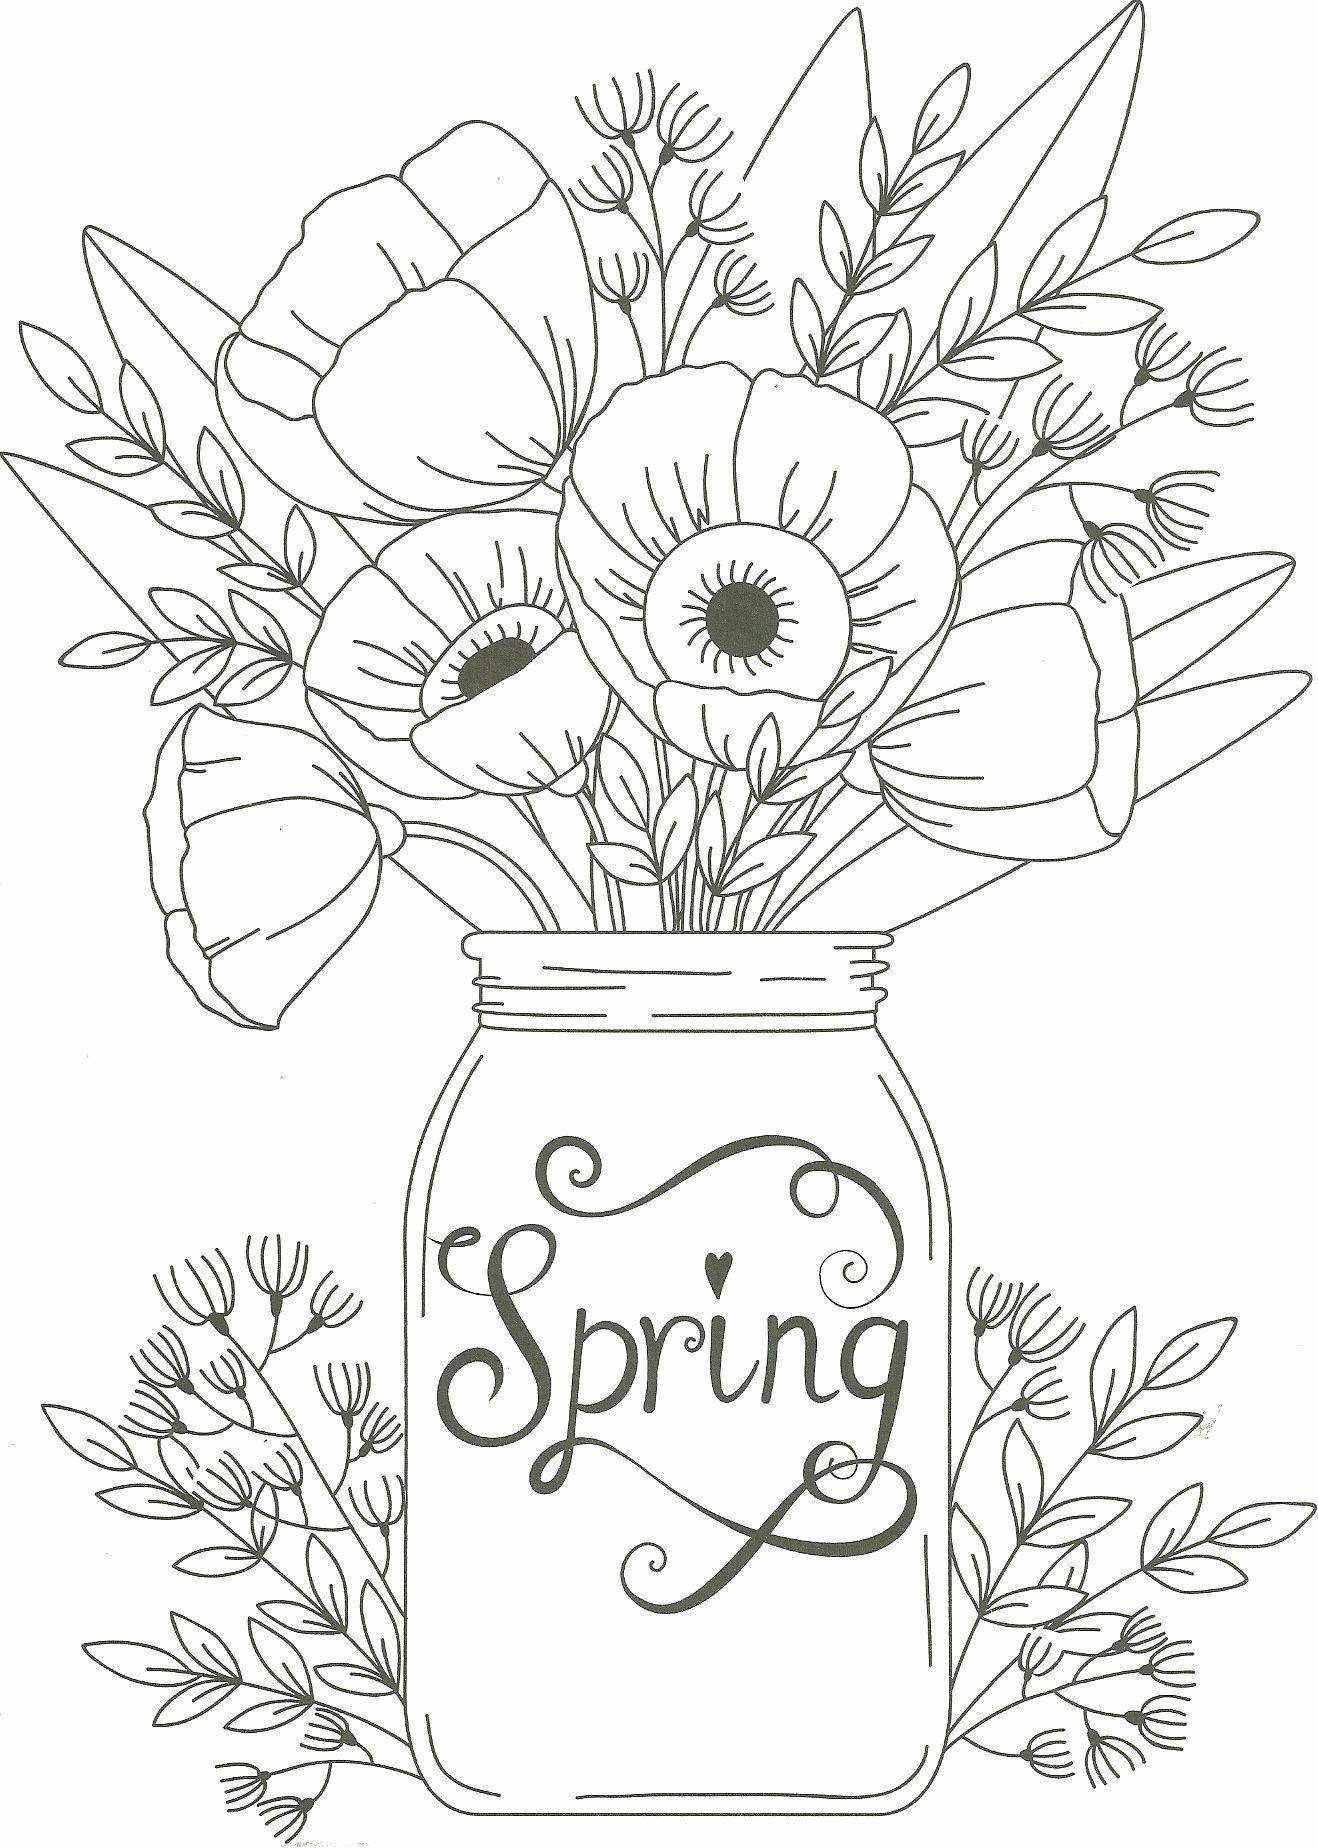 Spring Coloring Pages For Adults
 Spring Coloring Sheets for Adults in 2020 With images